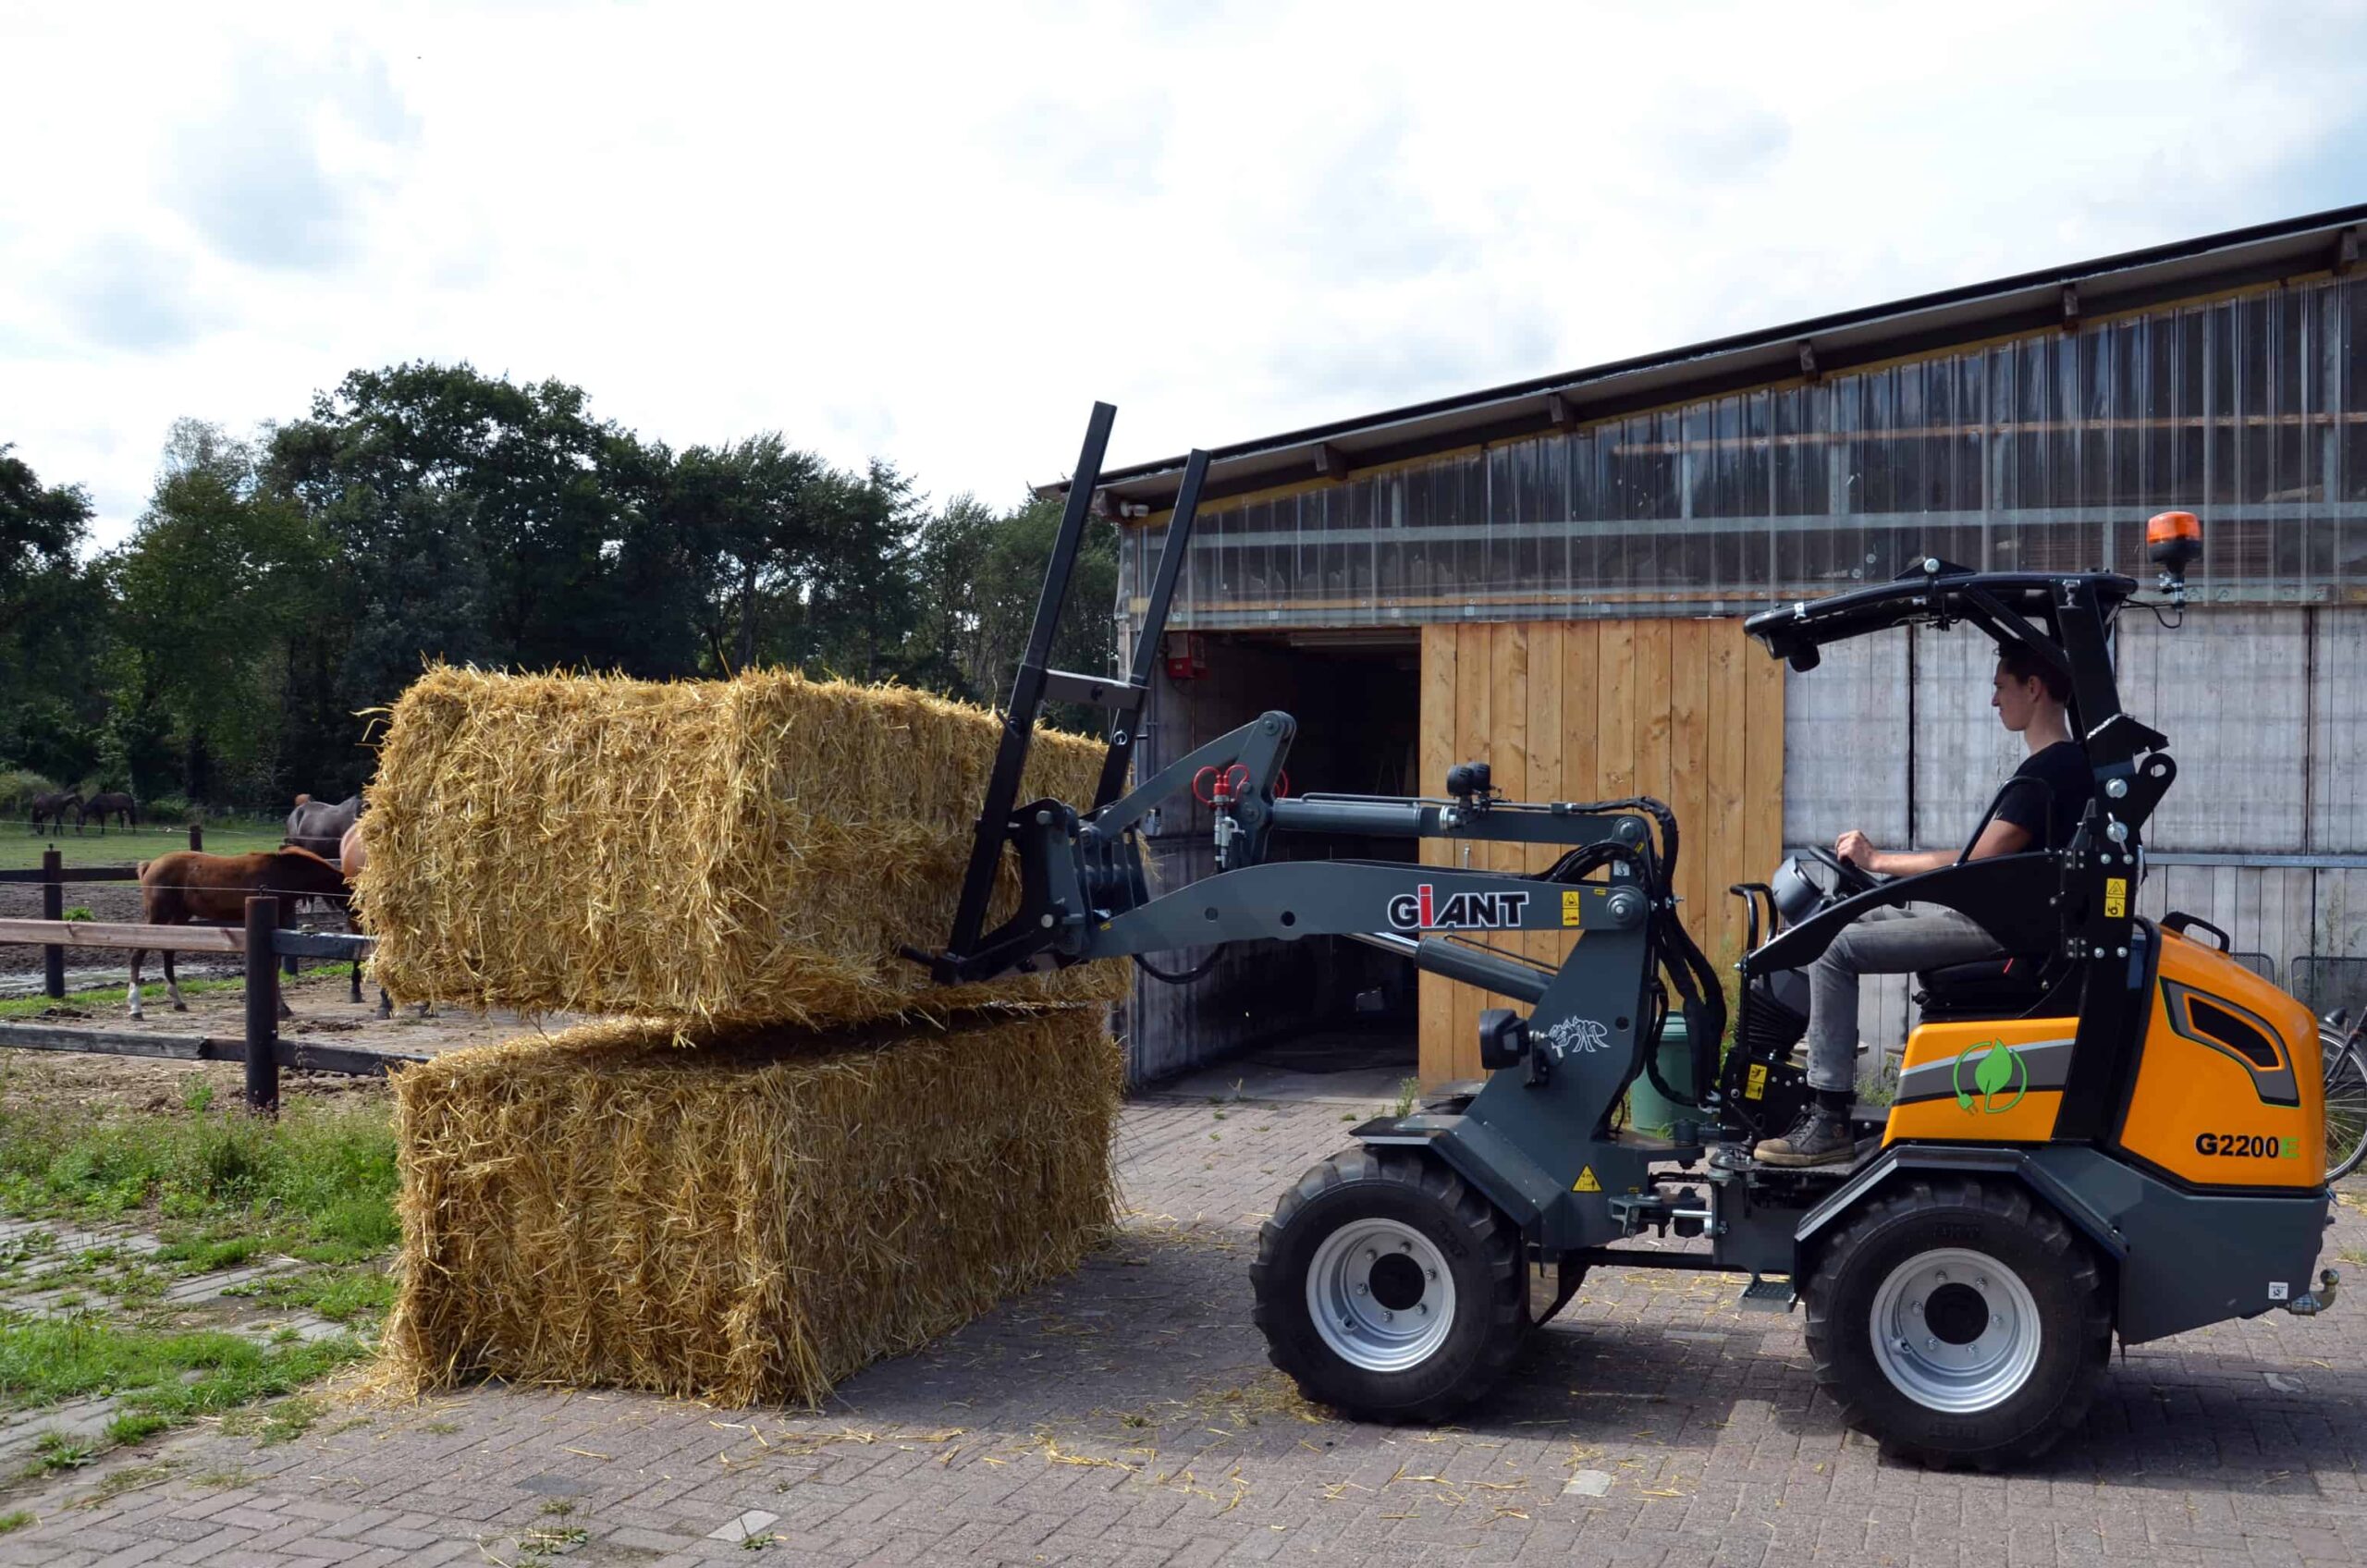 First electric loader from Tobroco-Giant